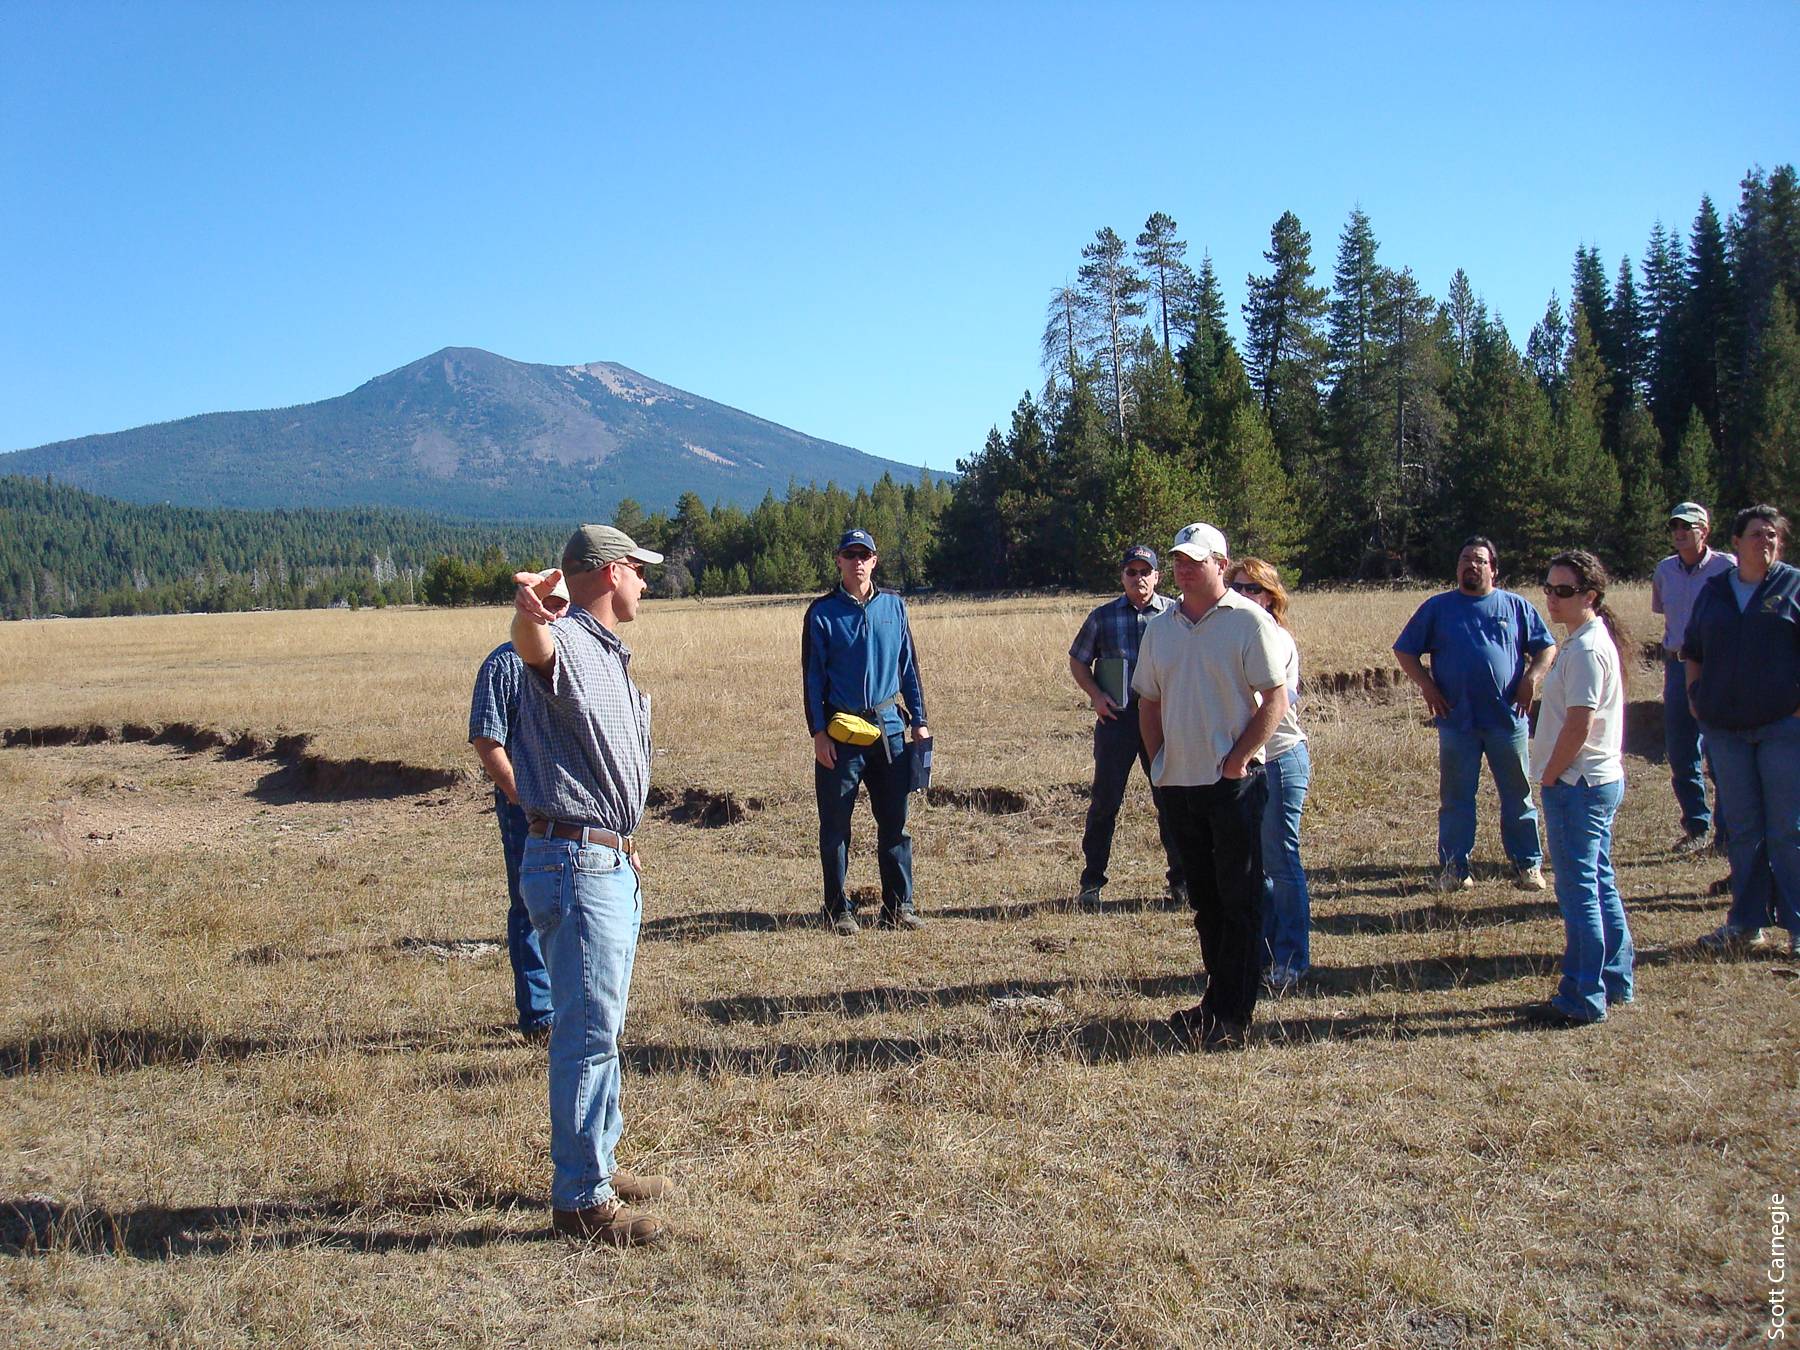 Members of the Burney-Hat group organized field trips and discussions with government agencies to inform development of the THP. The direct meetings and informal relationships that developed over time contributed to trust and, ultimately, the ability of both private landowners and agency personnel to effectively work together.